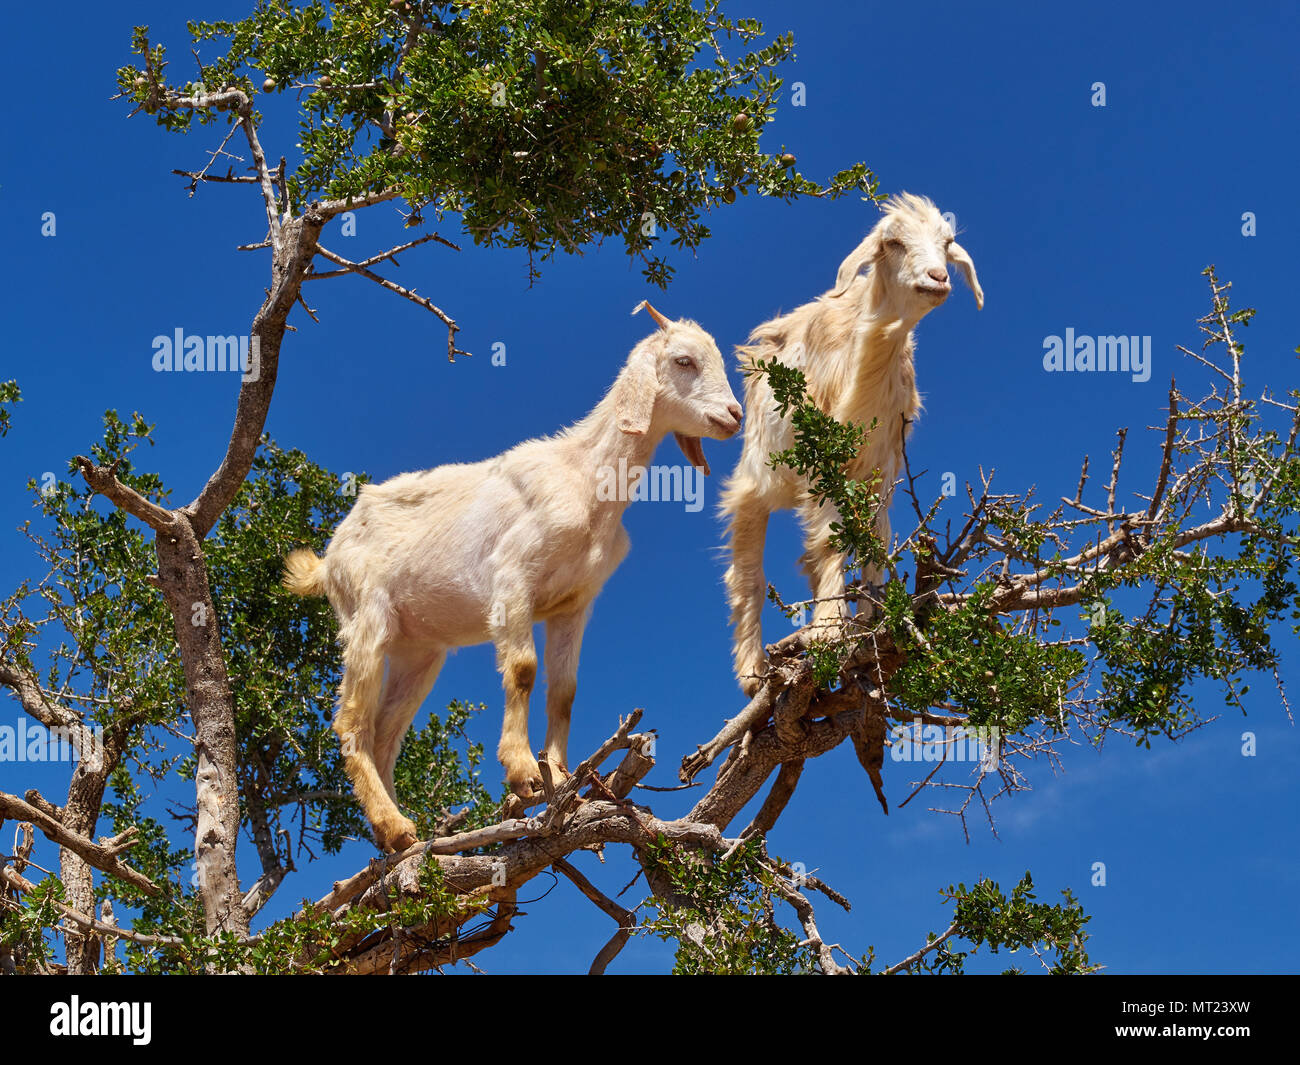 Two white goats on a dry branch of an argan tree against a blue sky background, Marrakech, Morocco. Stock Photo